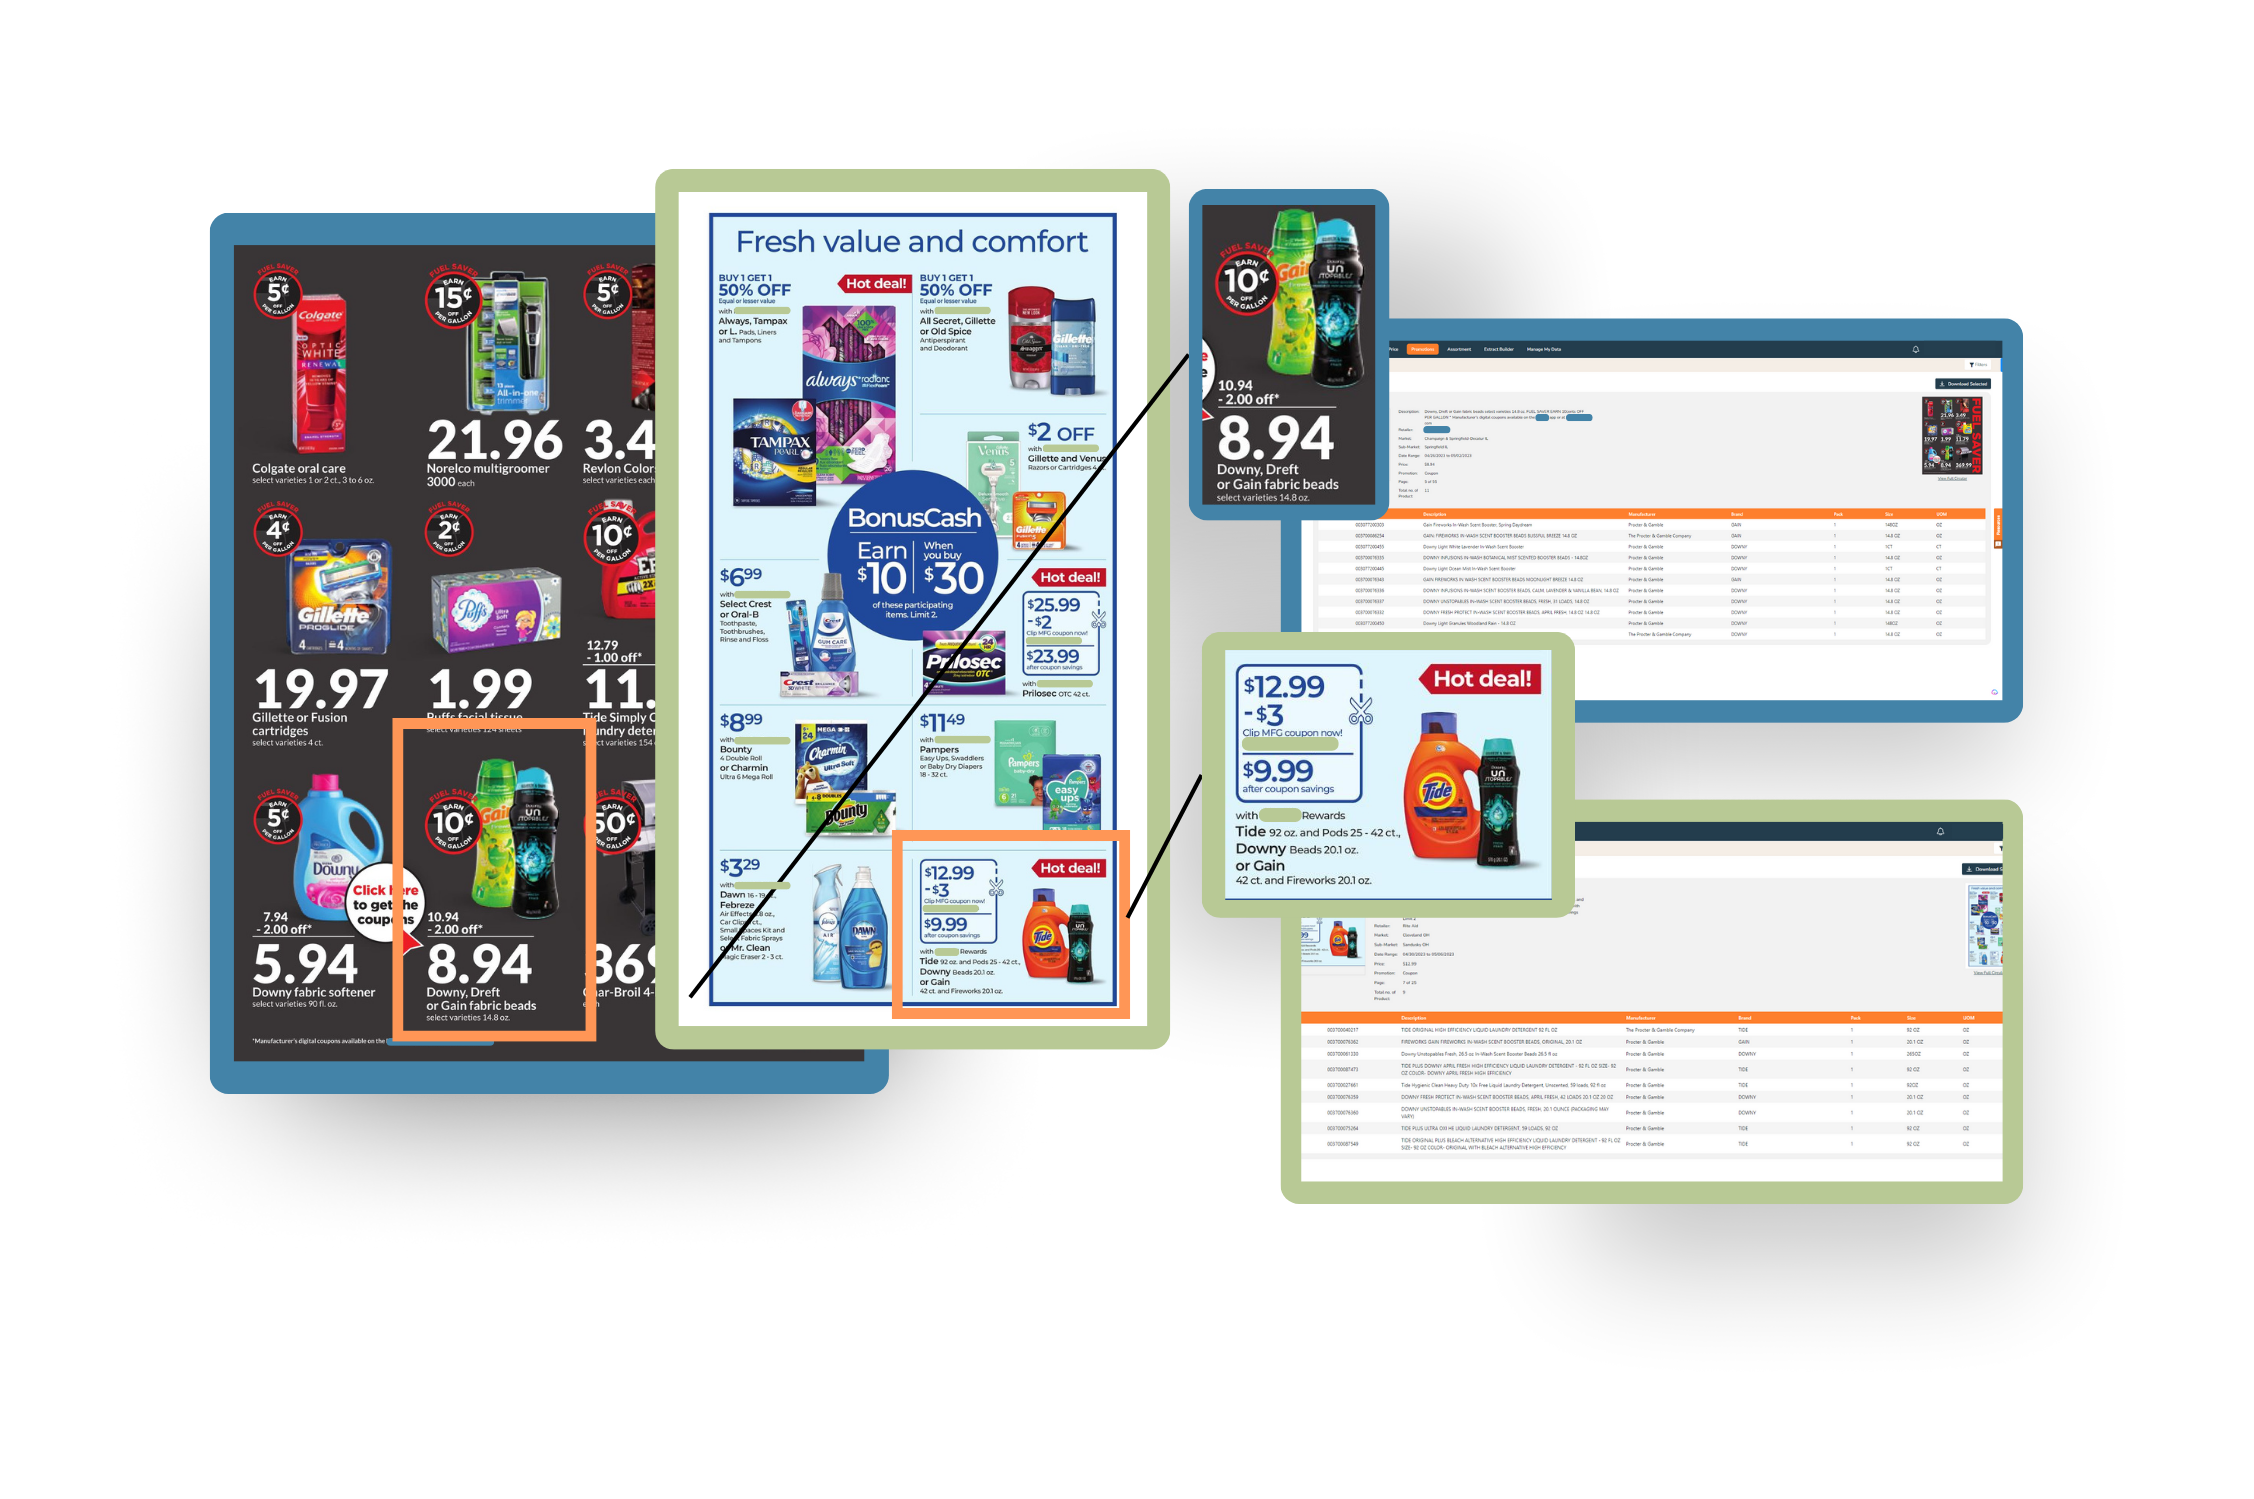 Screenshots of retail circulars that compare similar promotions on the same items along with screenshots of Intrics' Promotional Intelligence platform with UPC-level data for each item linked to the promotion.